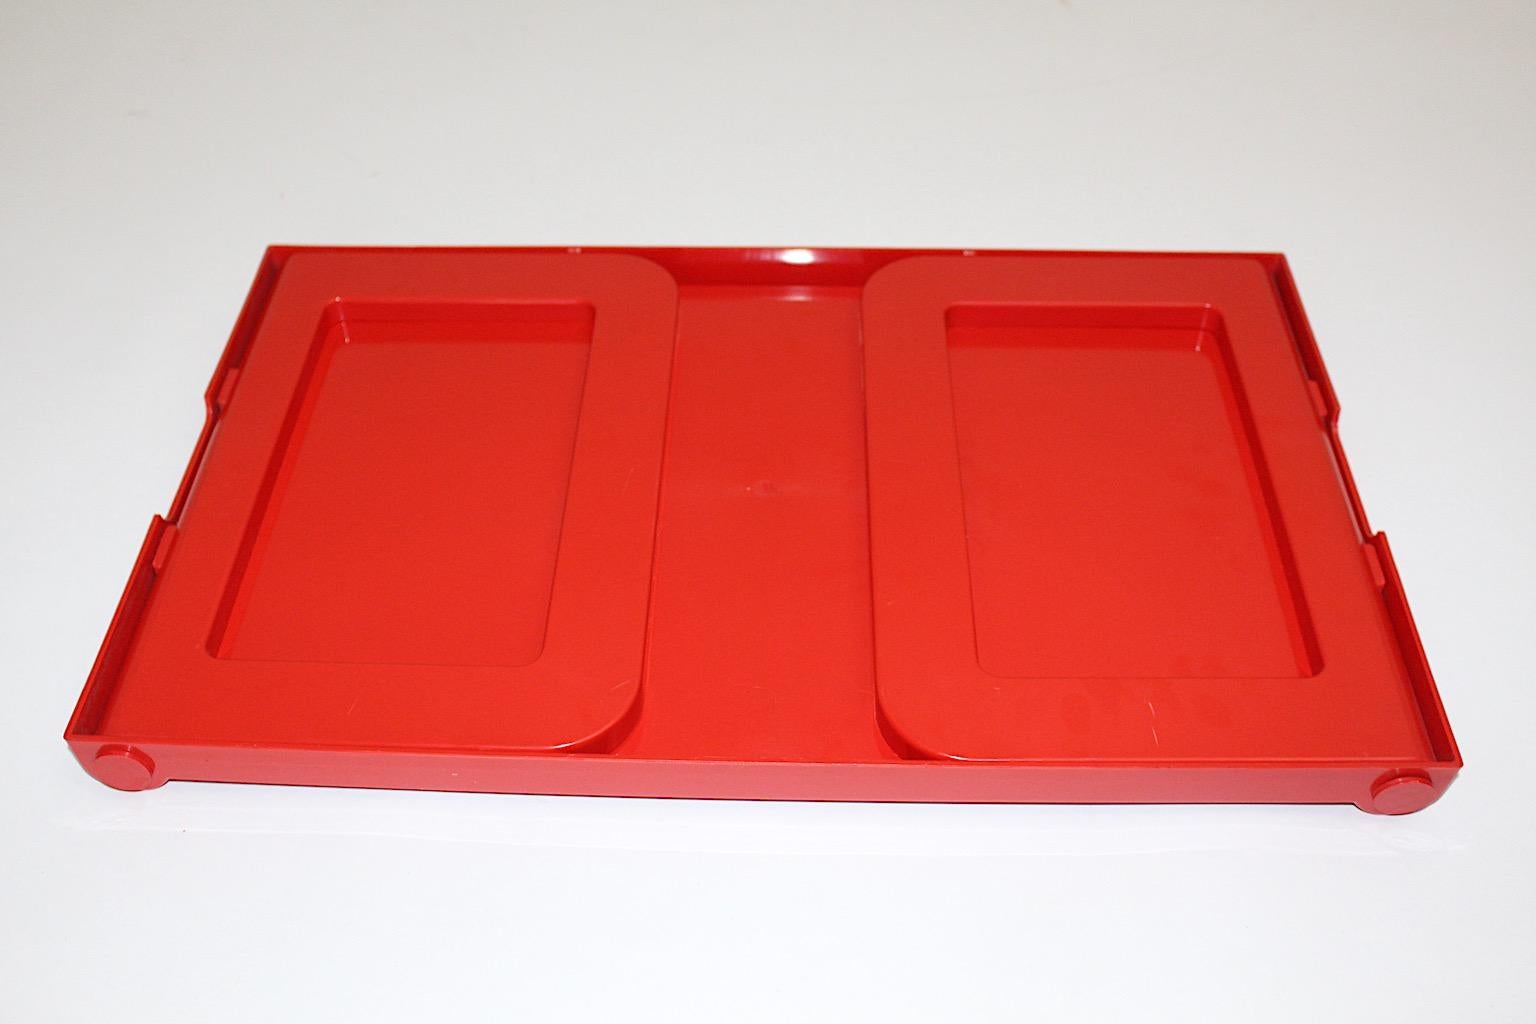 Red Plastic Space Age Vintage Tray Bed Table Luigi Massoni Guzzini, 1970s, Italy For Sale 2